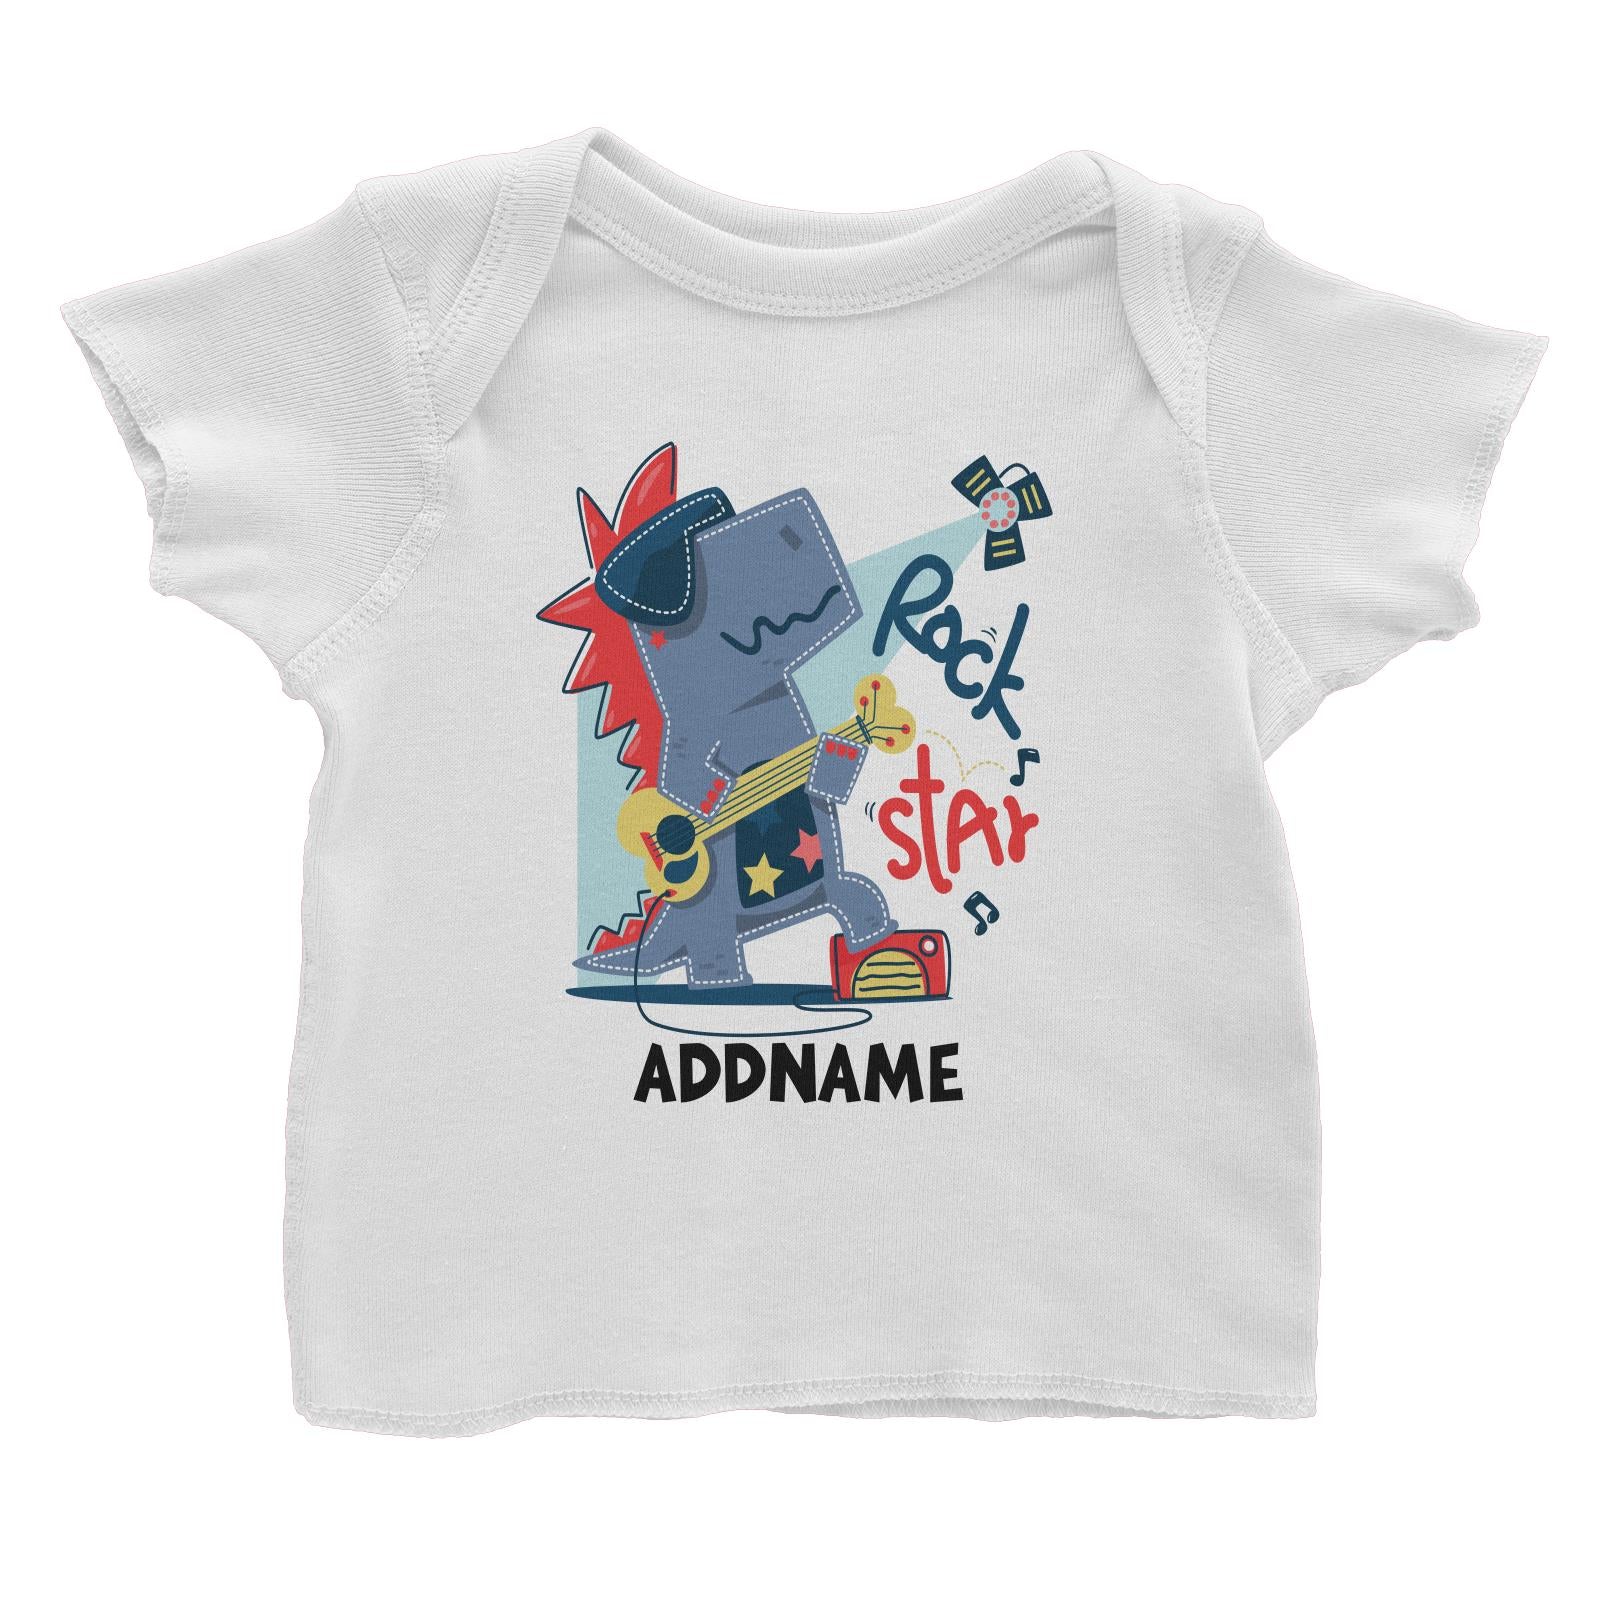 Rock Star Dinosaur with Guitar Addname White Baby T-Shirt